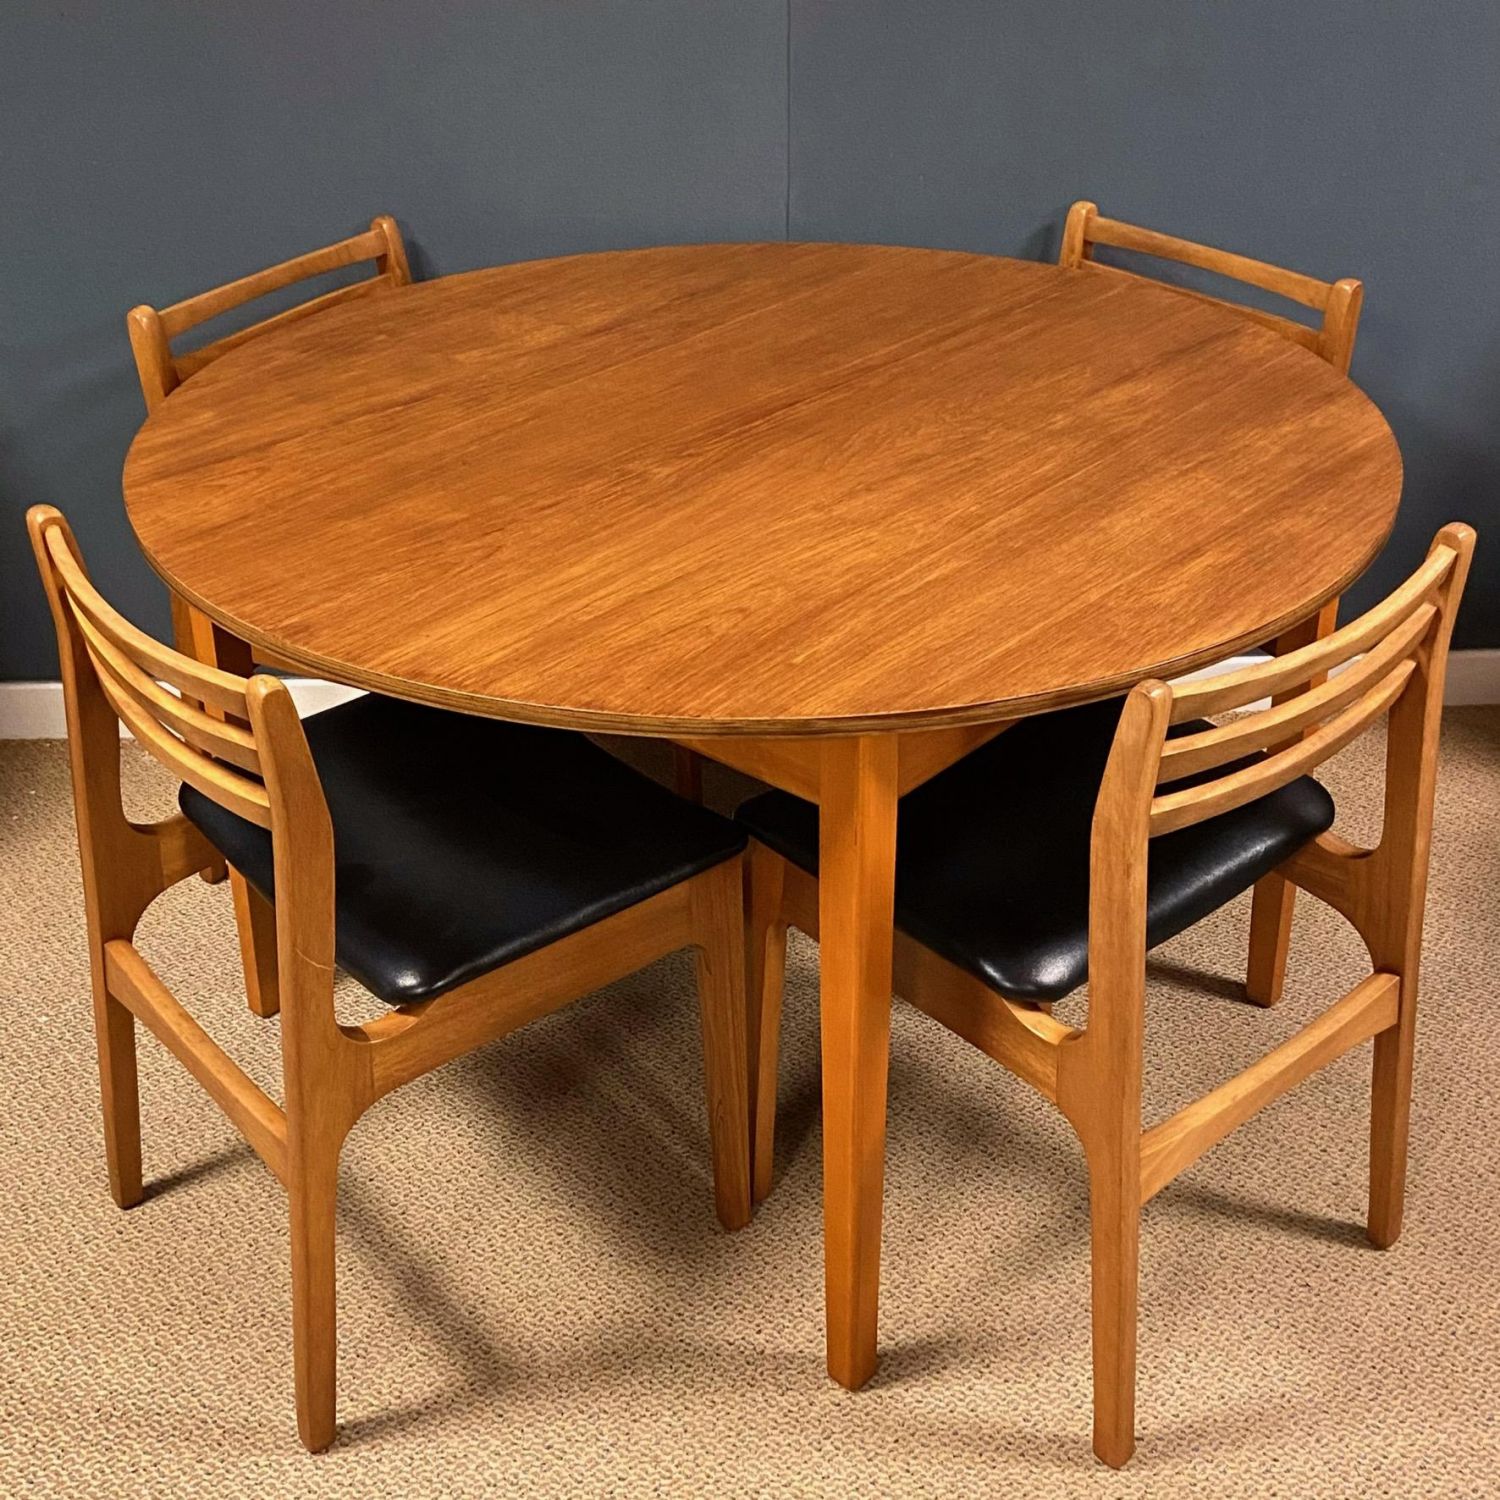 1970s Teak Dining Table And Four Chairs, 1970s Dining Room Chairs